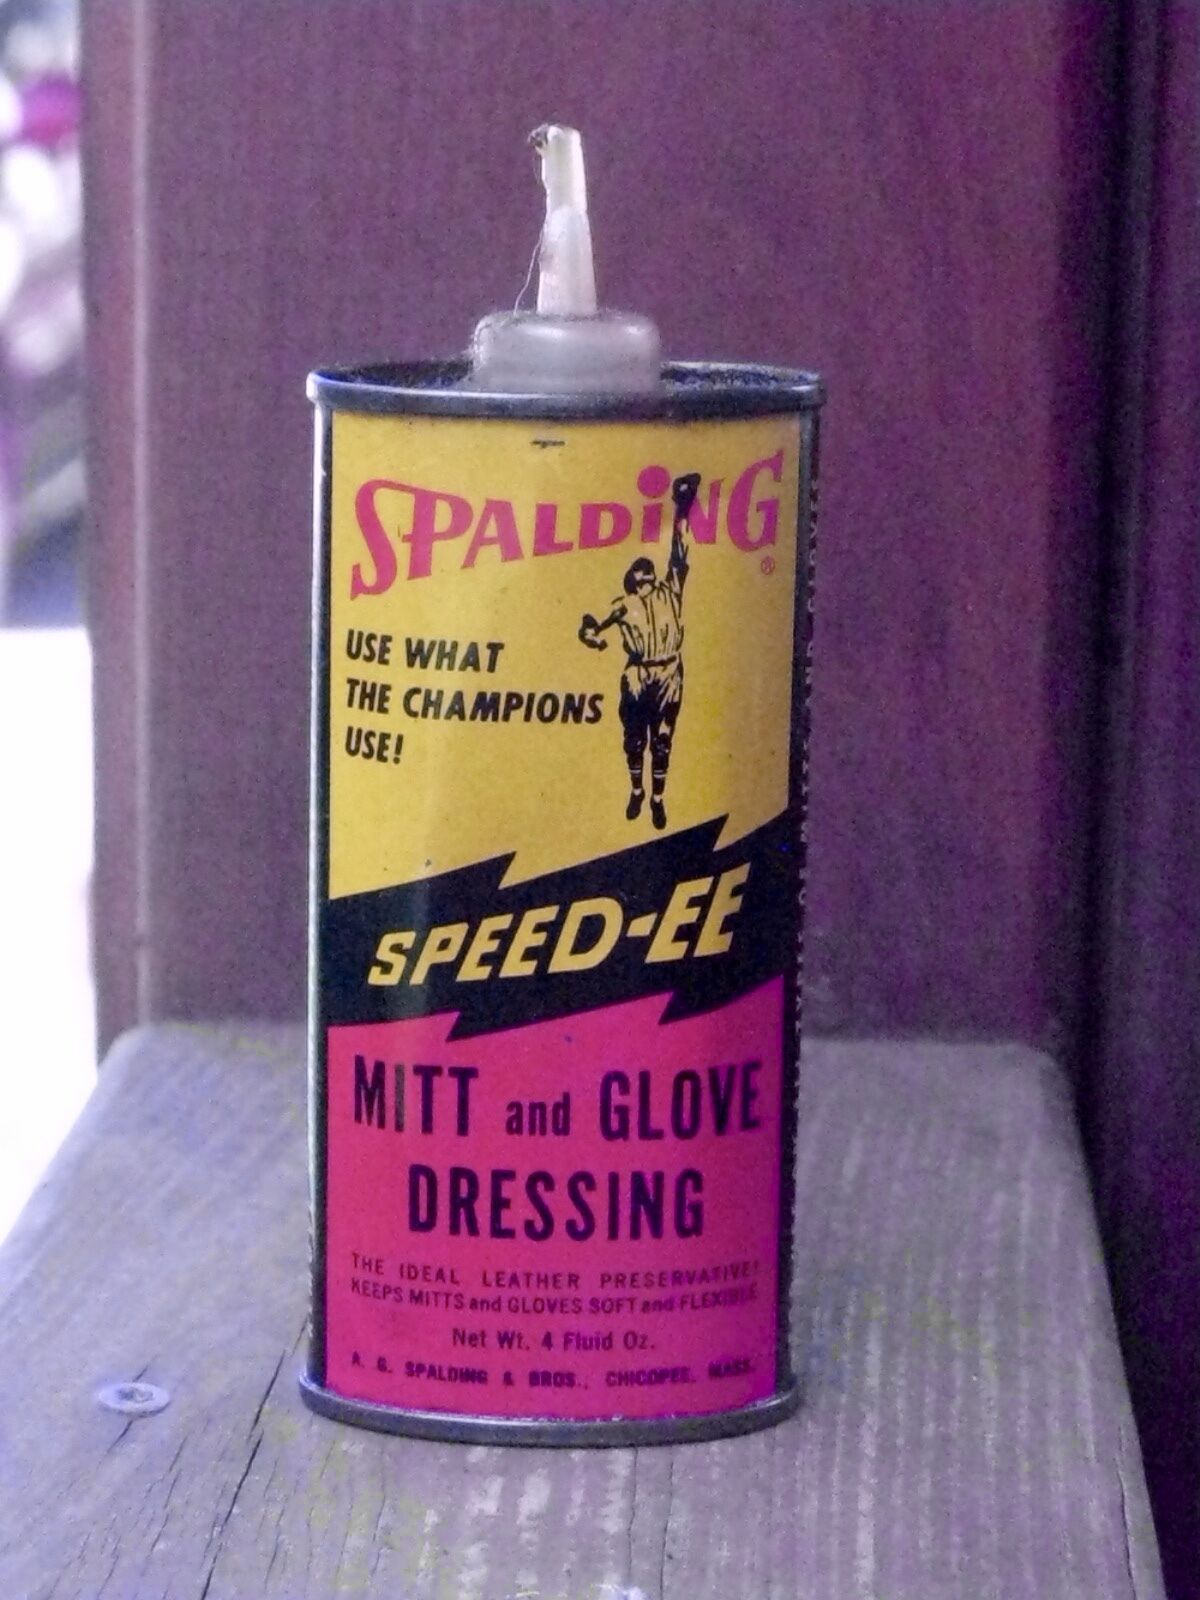 OLD SPALDING SPEED-EE MITT and GLOVE DRESSING CAN TIN BASEBALL SPORTS COLLECTOR